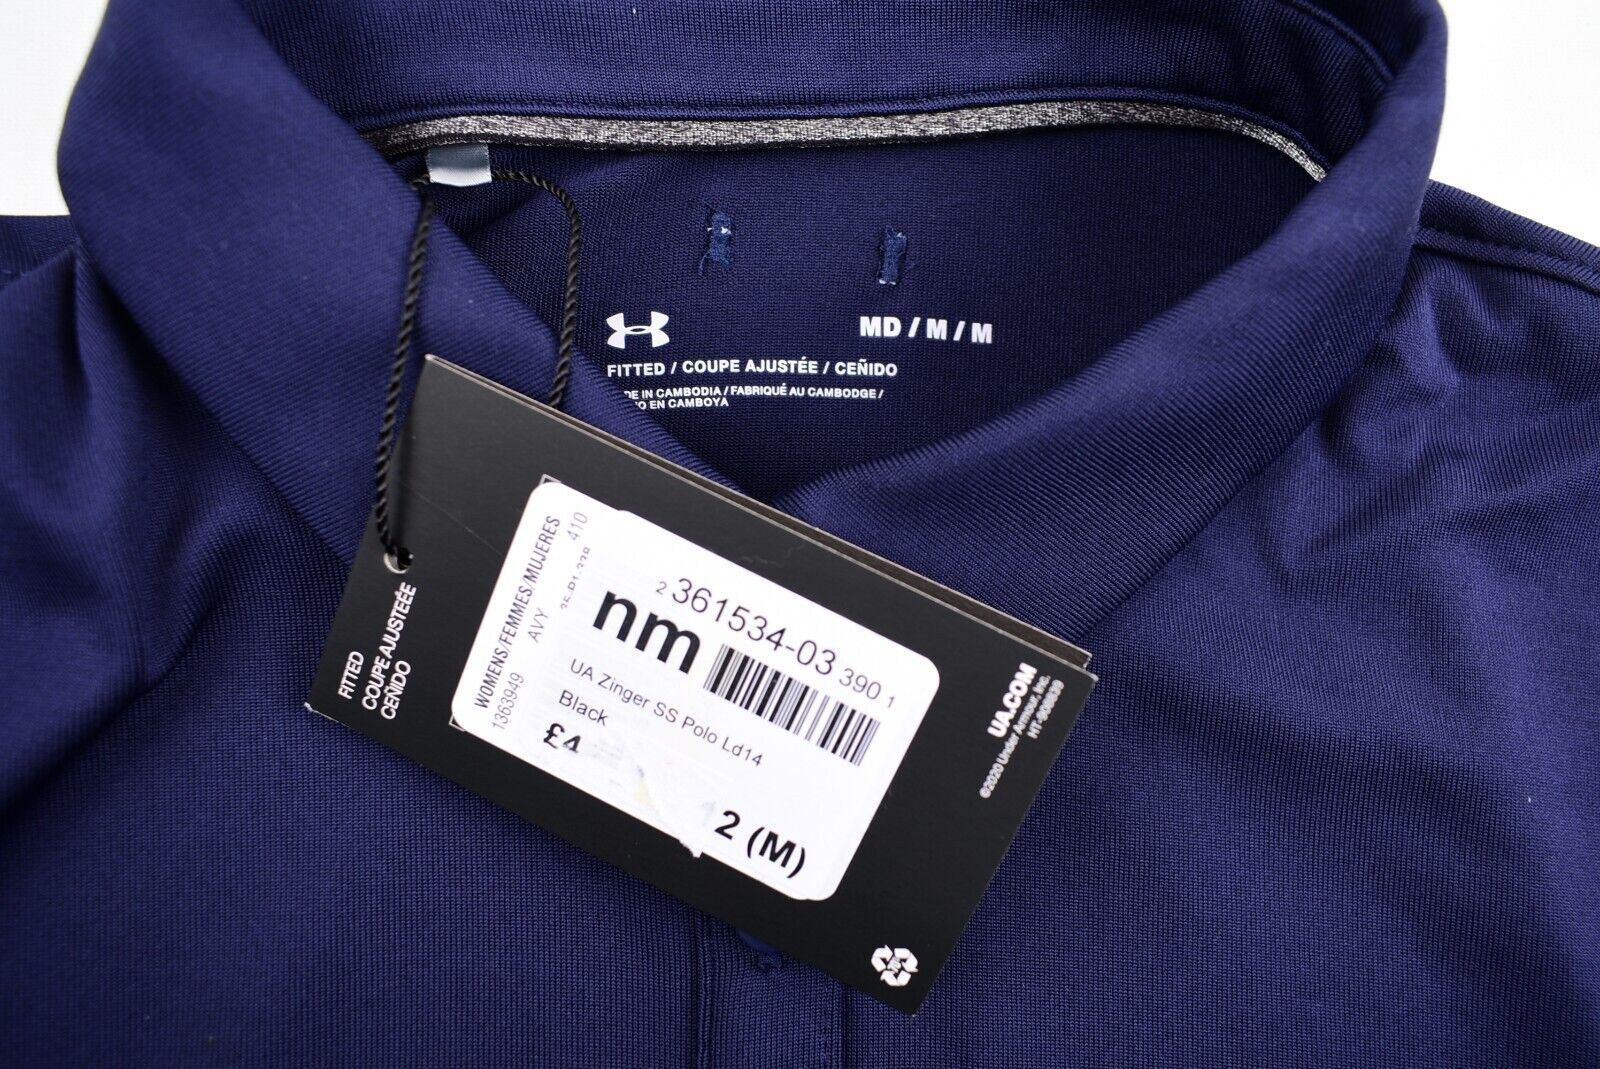 UNDER ARMOUR Womens ZINGER Polo Shirt, Fitted Style, Navy Blue, size M /UK 12